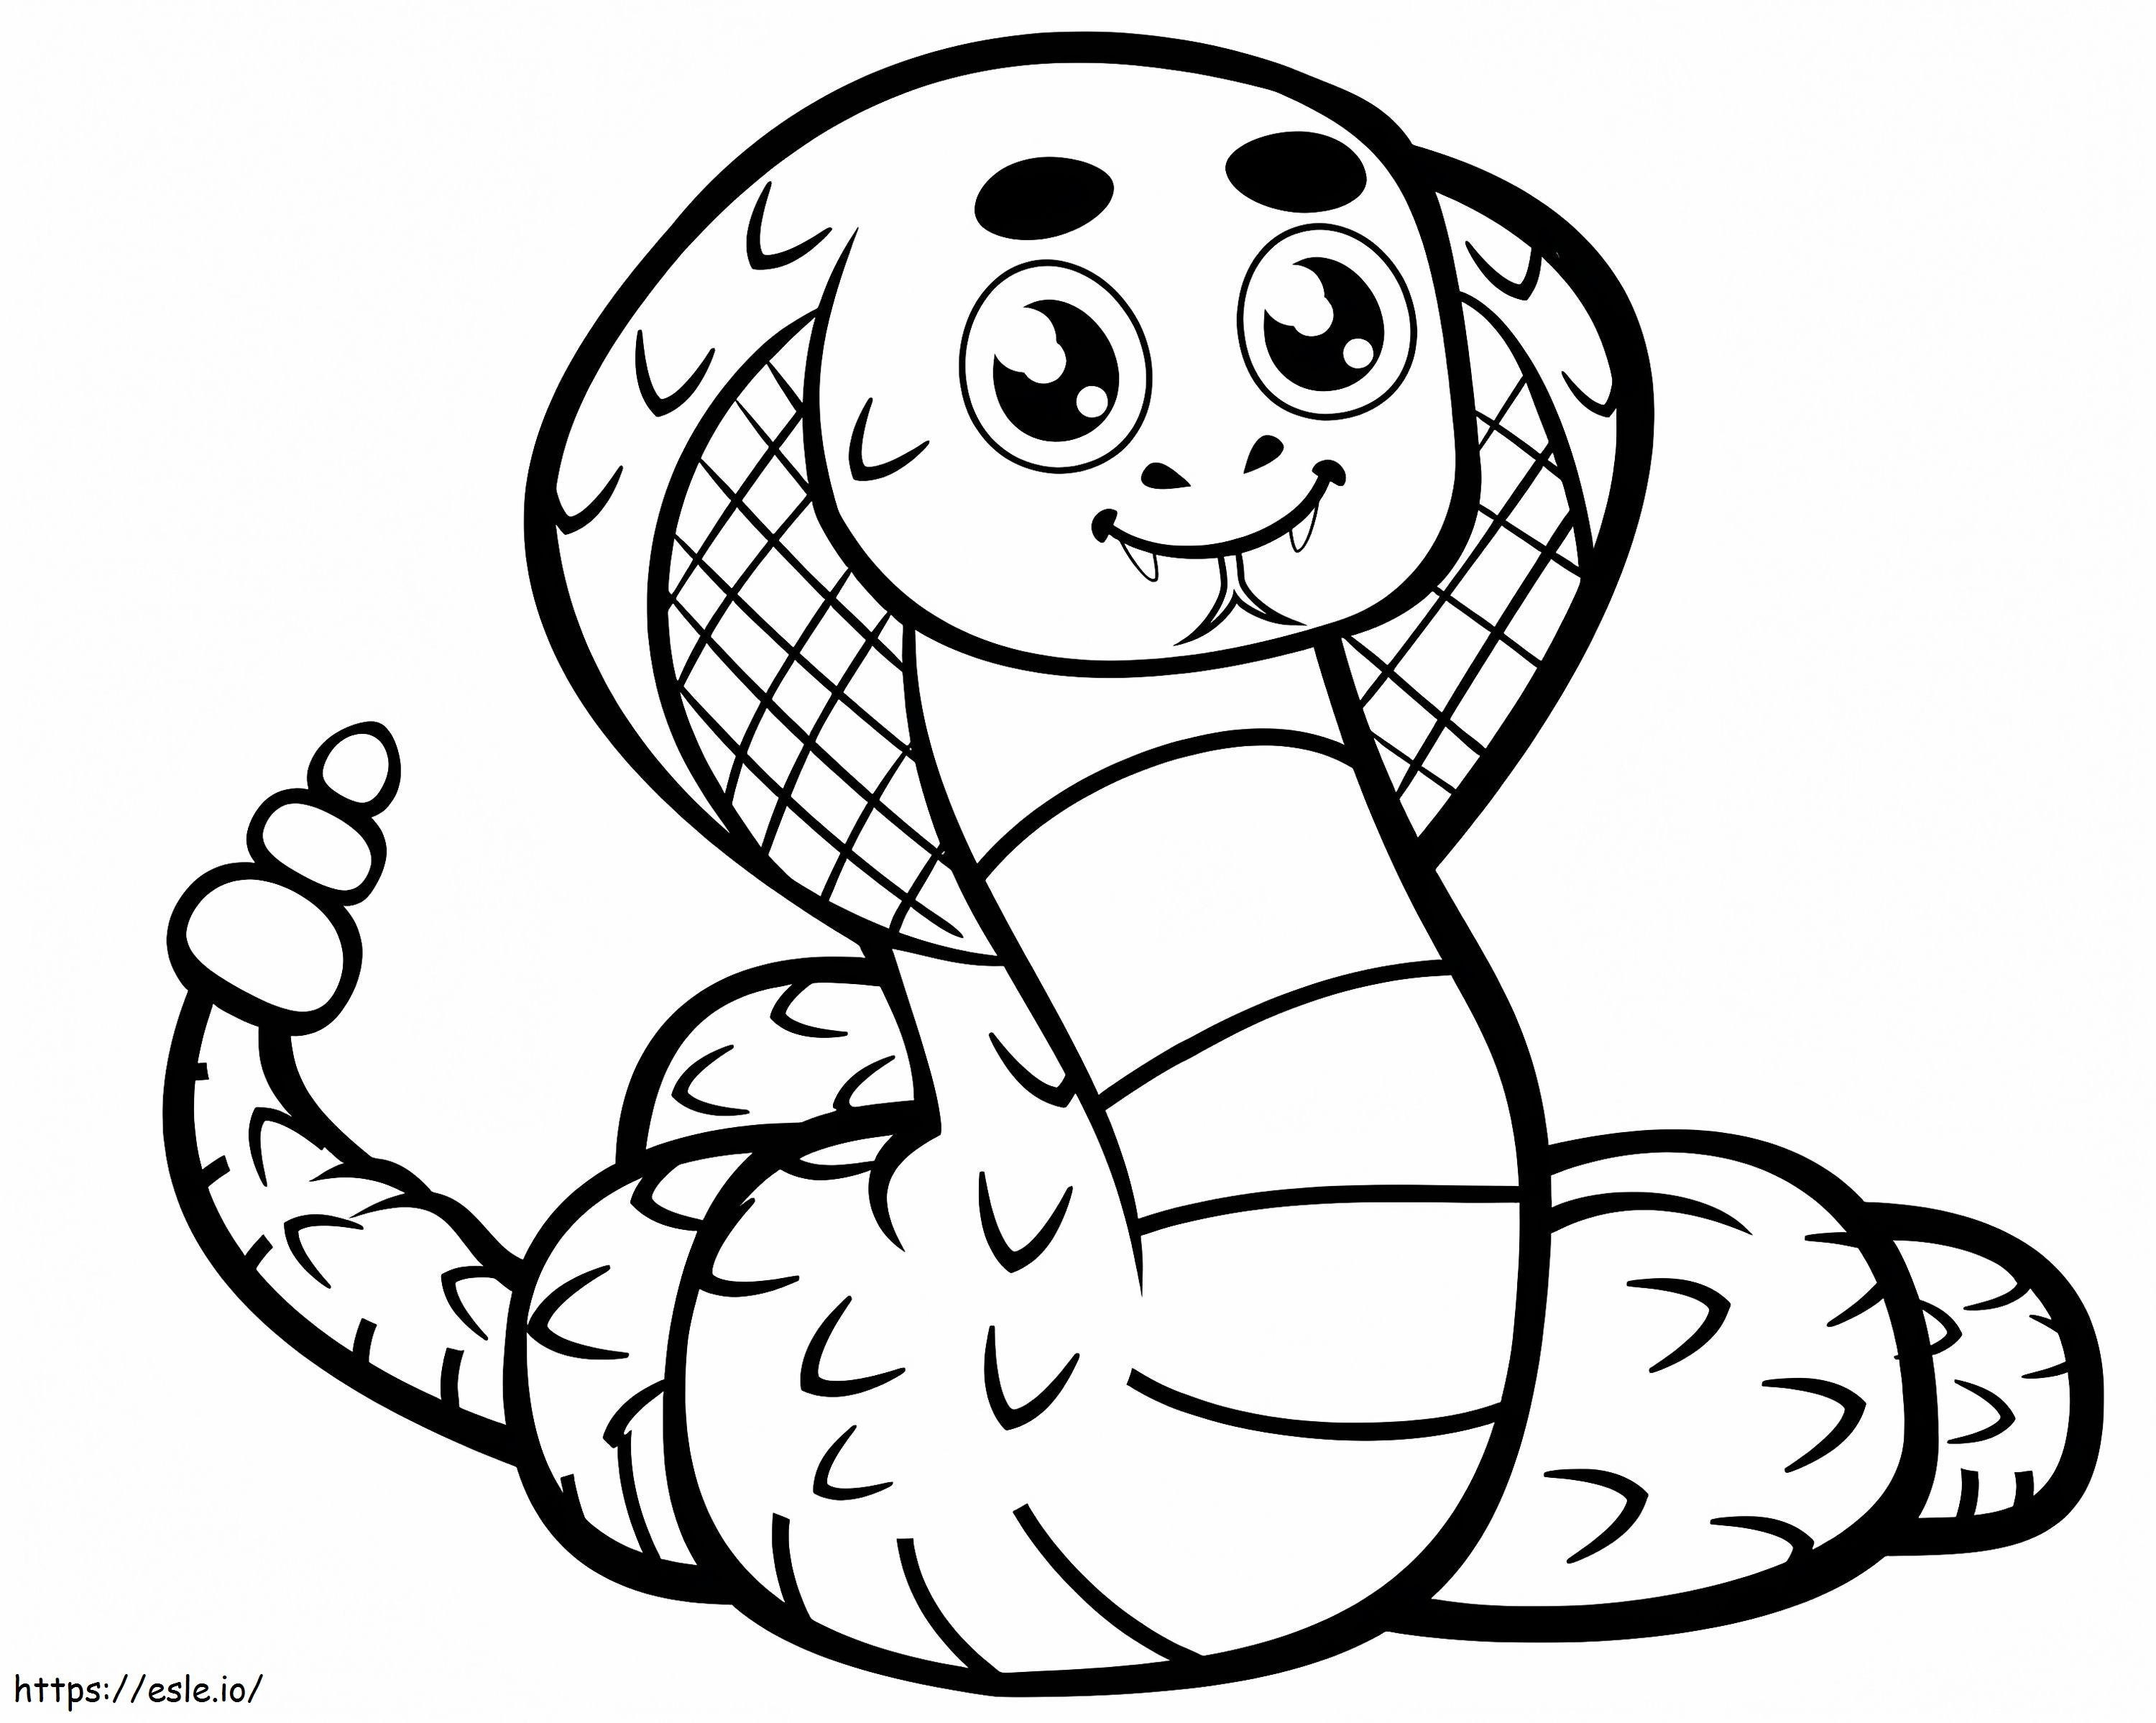 1559785107 Cute Baby Snake A4 coloring page